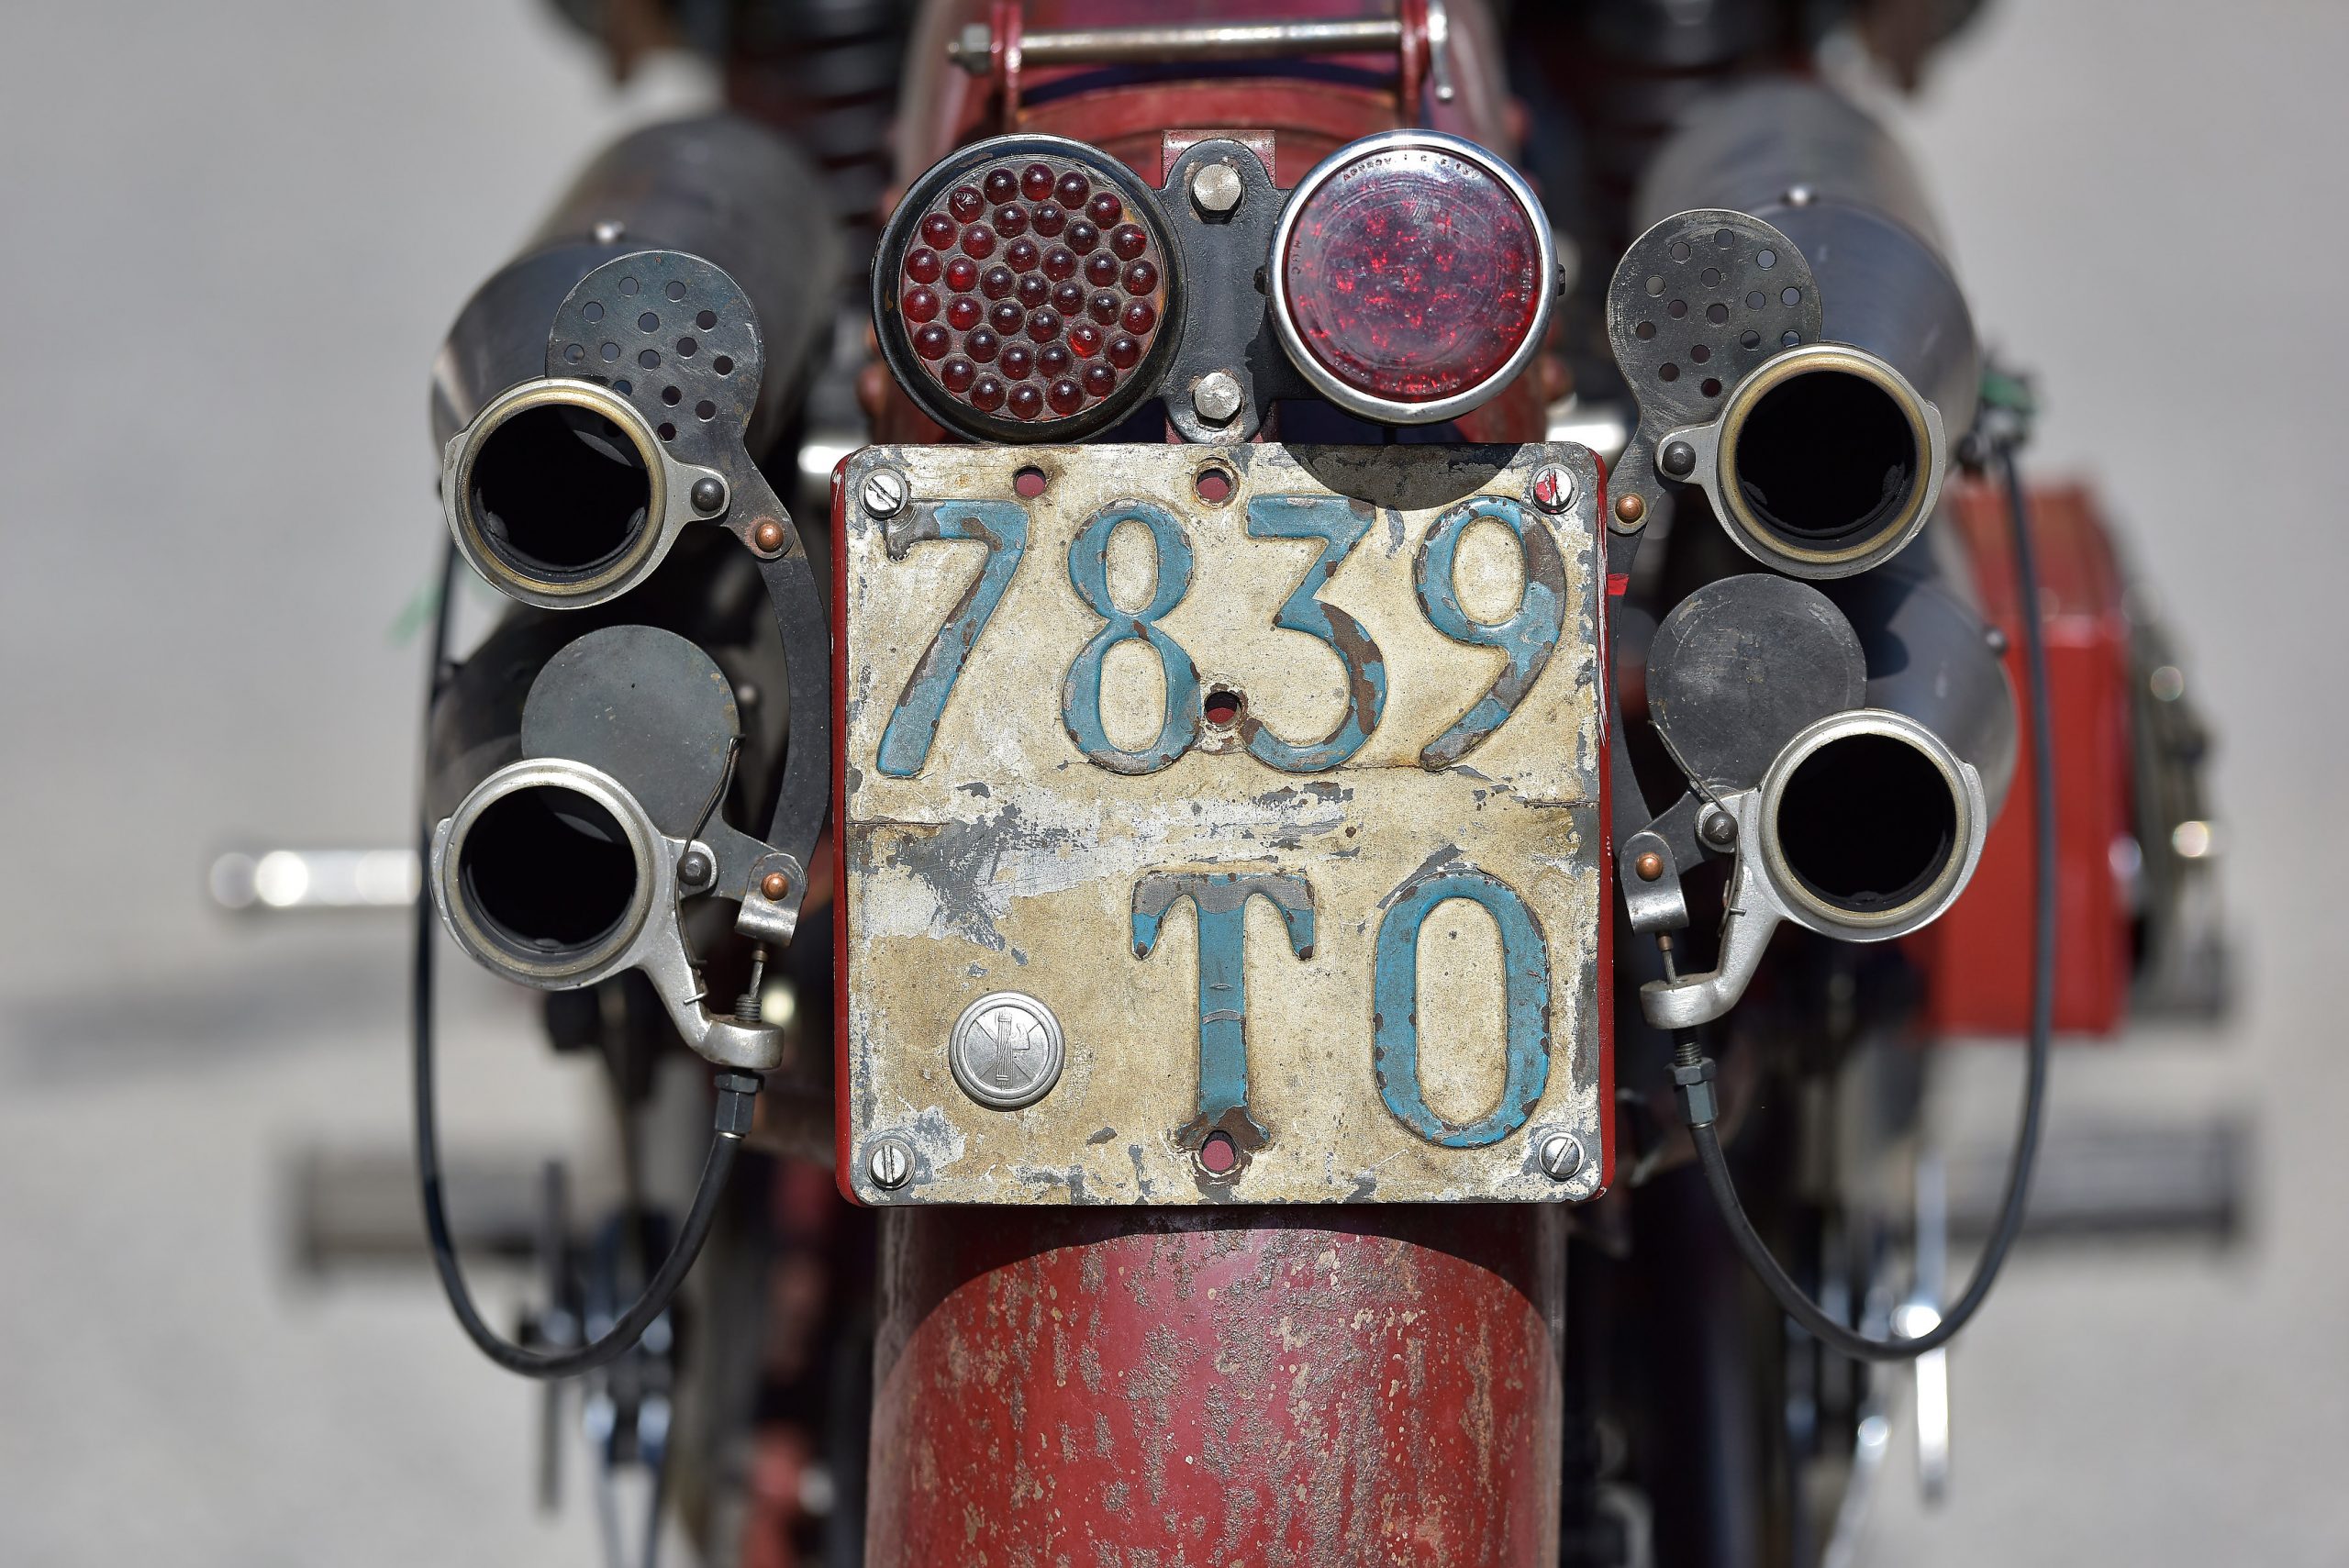 a view of the back licenses plate of a vintage bike